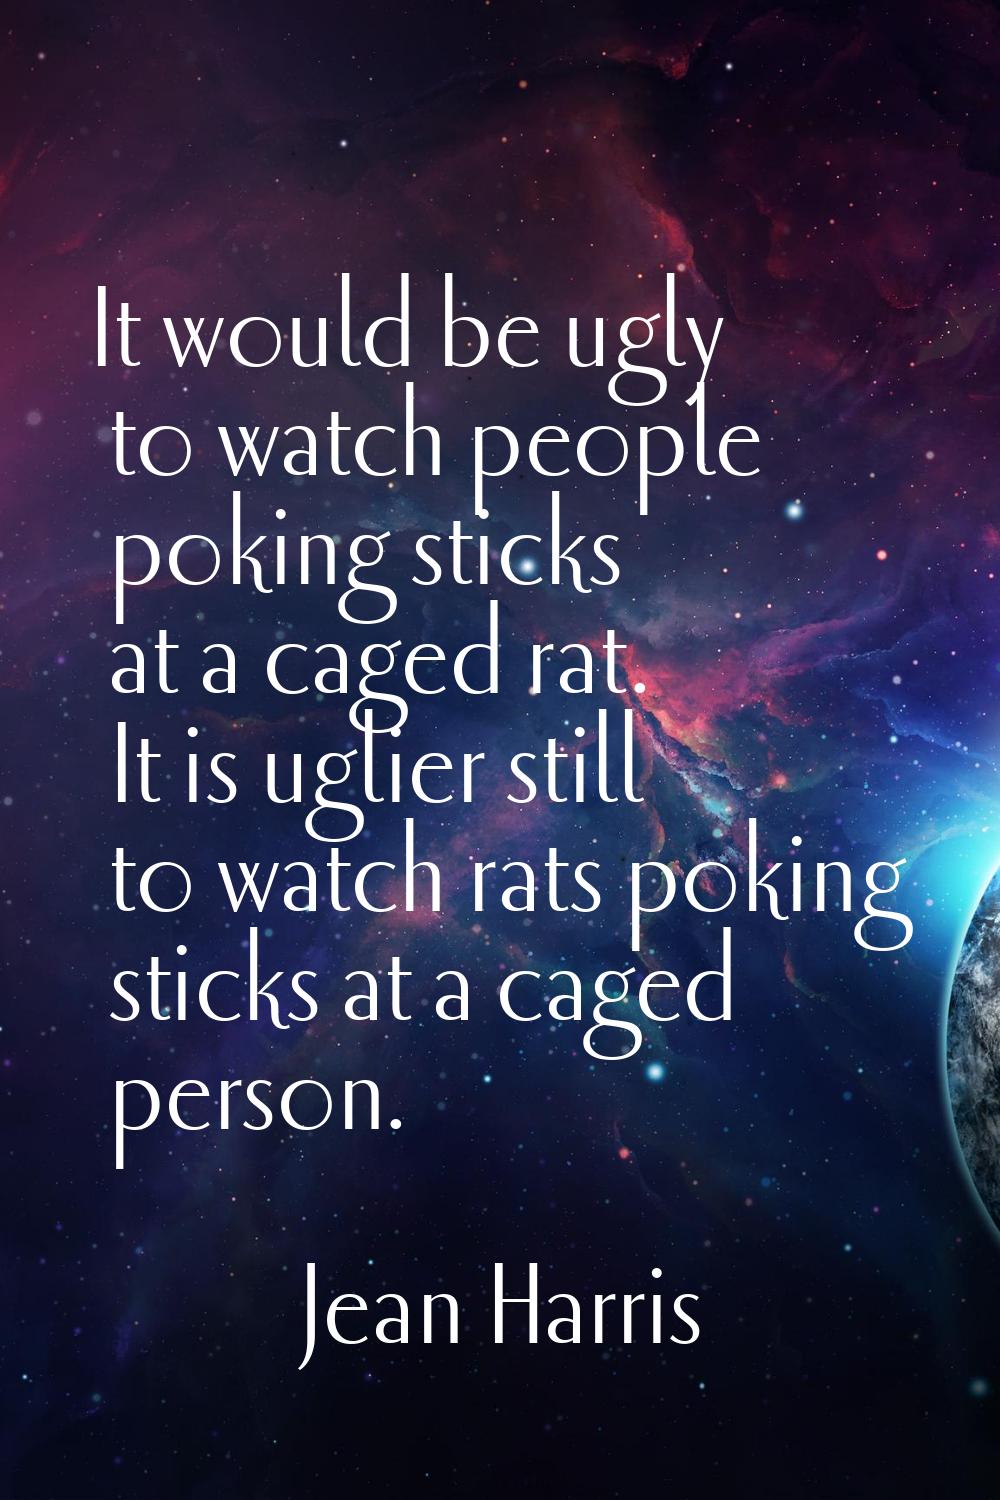 It would be ugly to watch people poking sticks at a caged rat. It is uglier still to watch rats pok